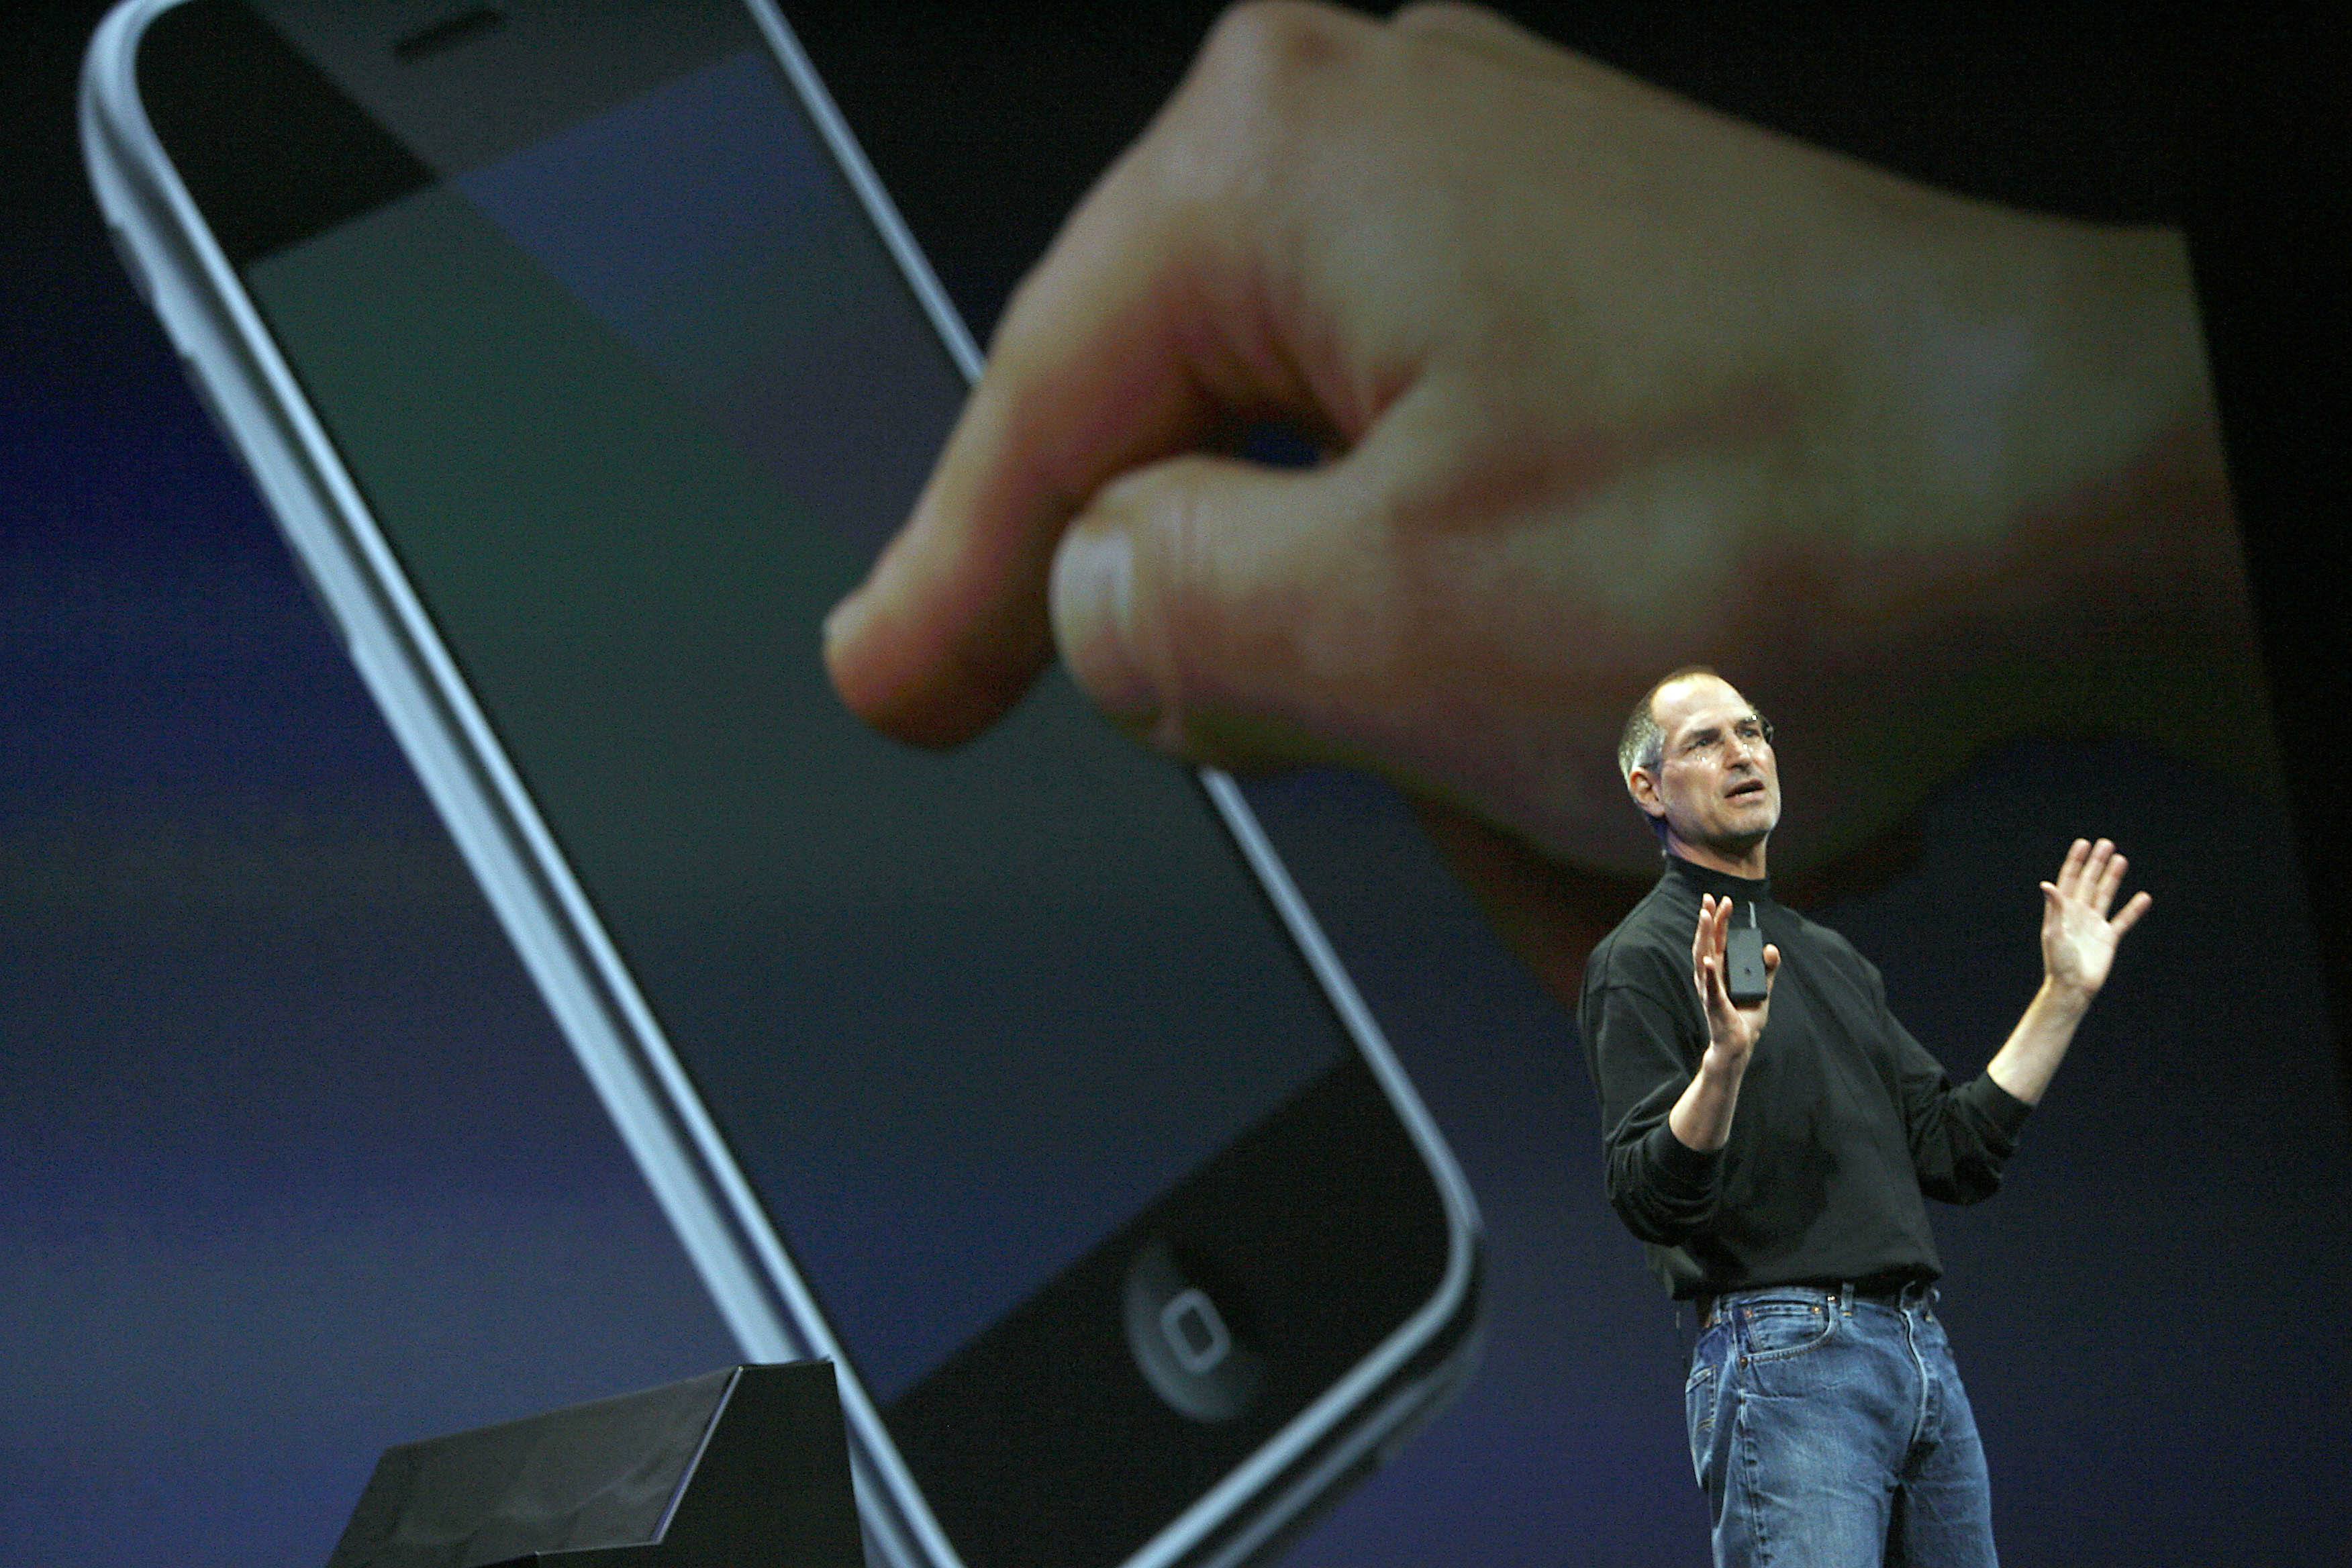 Apple chief executive Steve Jobs unveils a new mobile phone